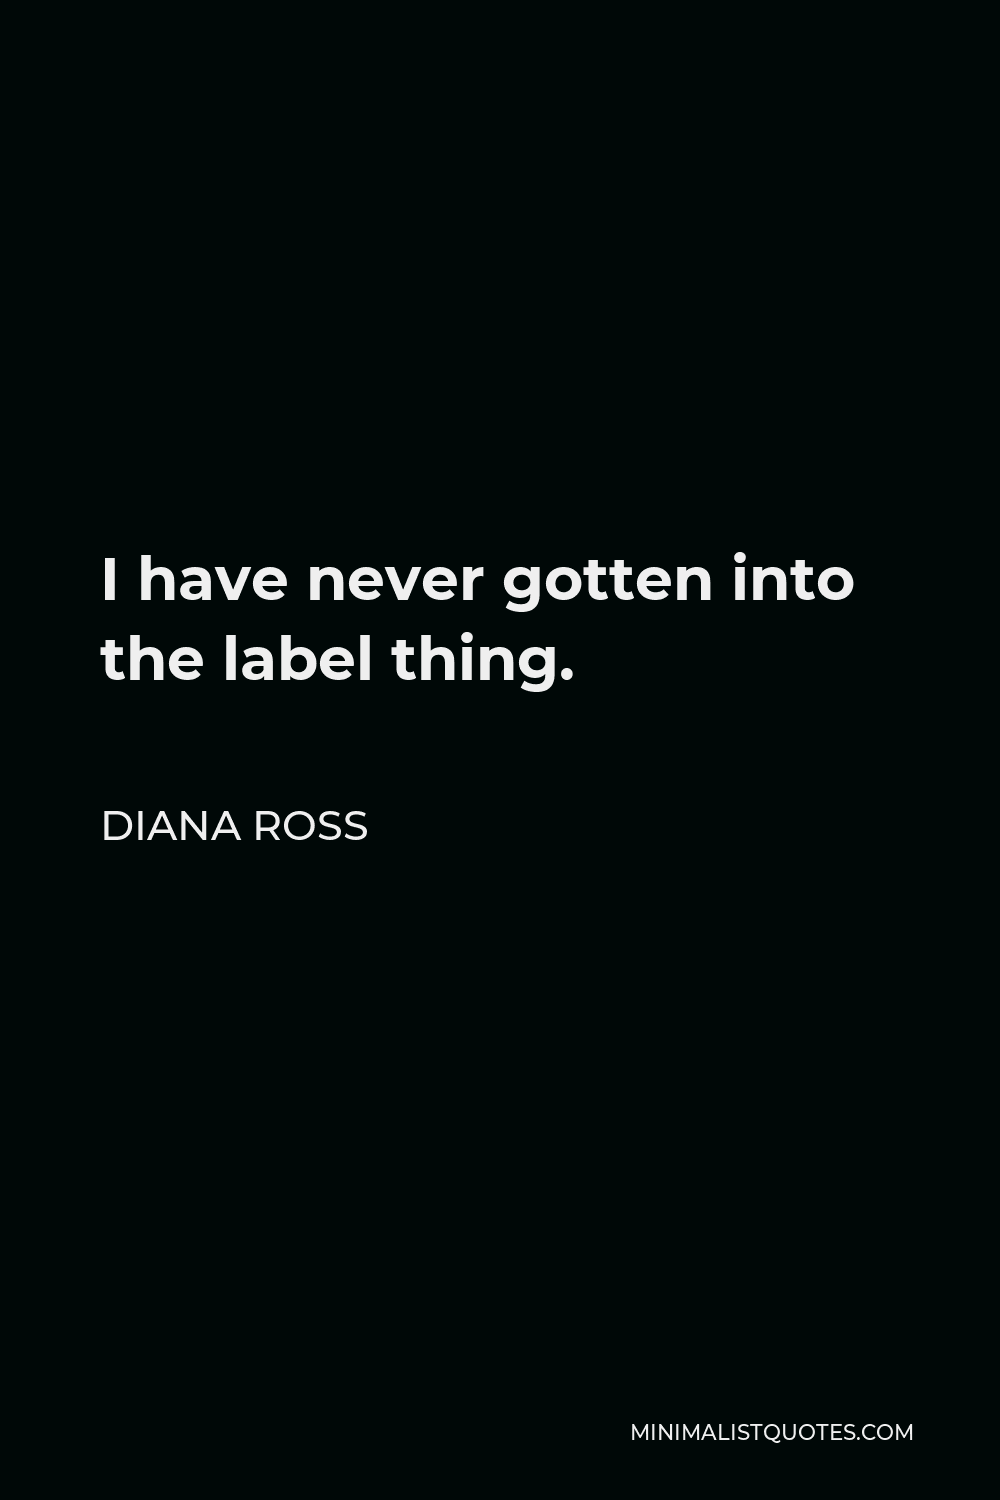 Diana Ross Quote - I have never gotten into the label thing.